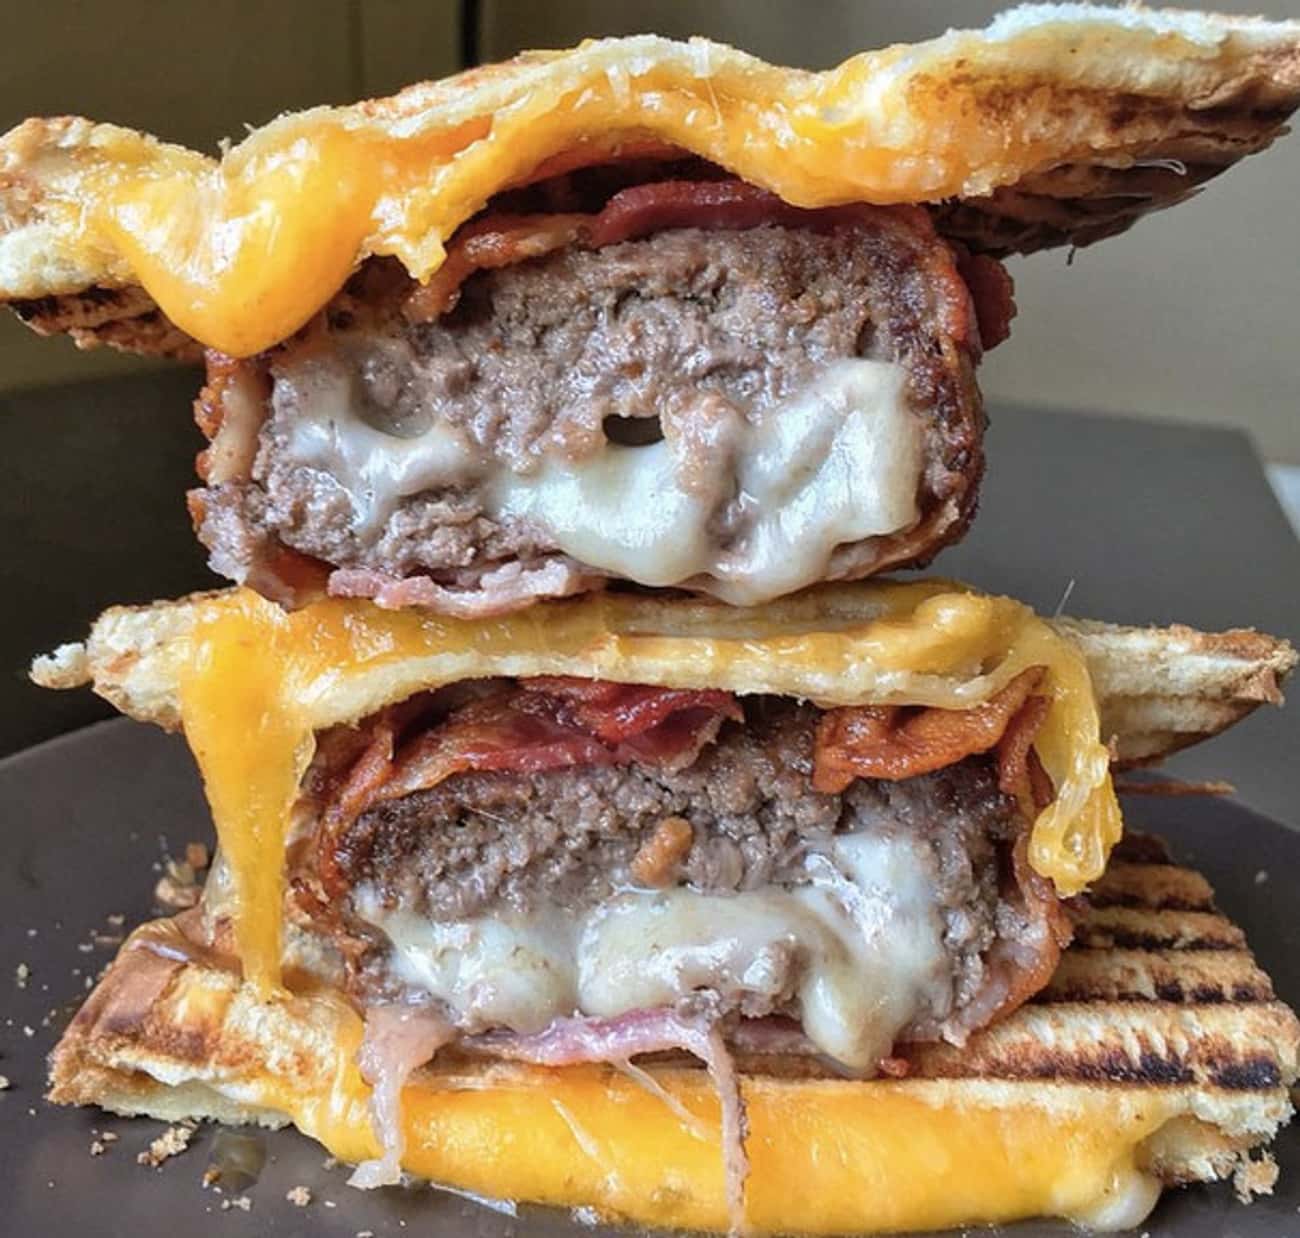 Bacon Wrapped Mozzarella Stuffed Cheeseburger with Grilled Cheese Buns